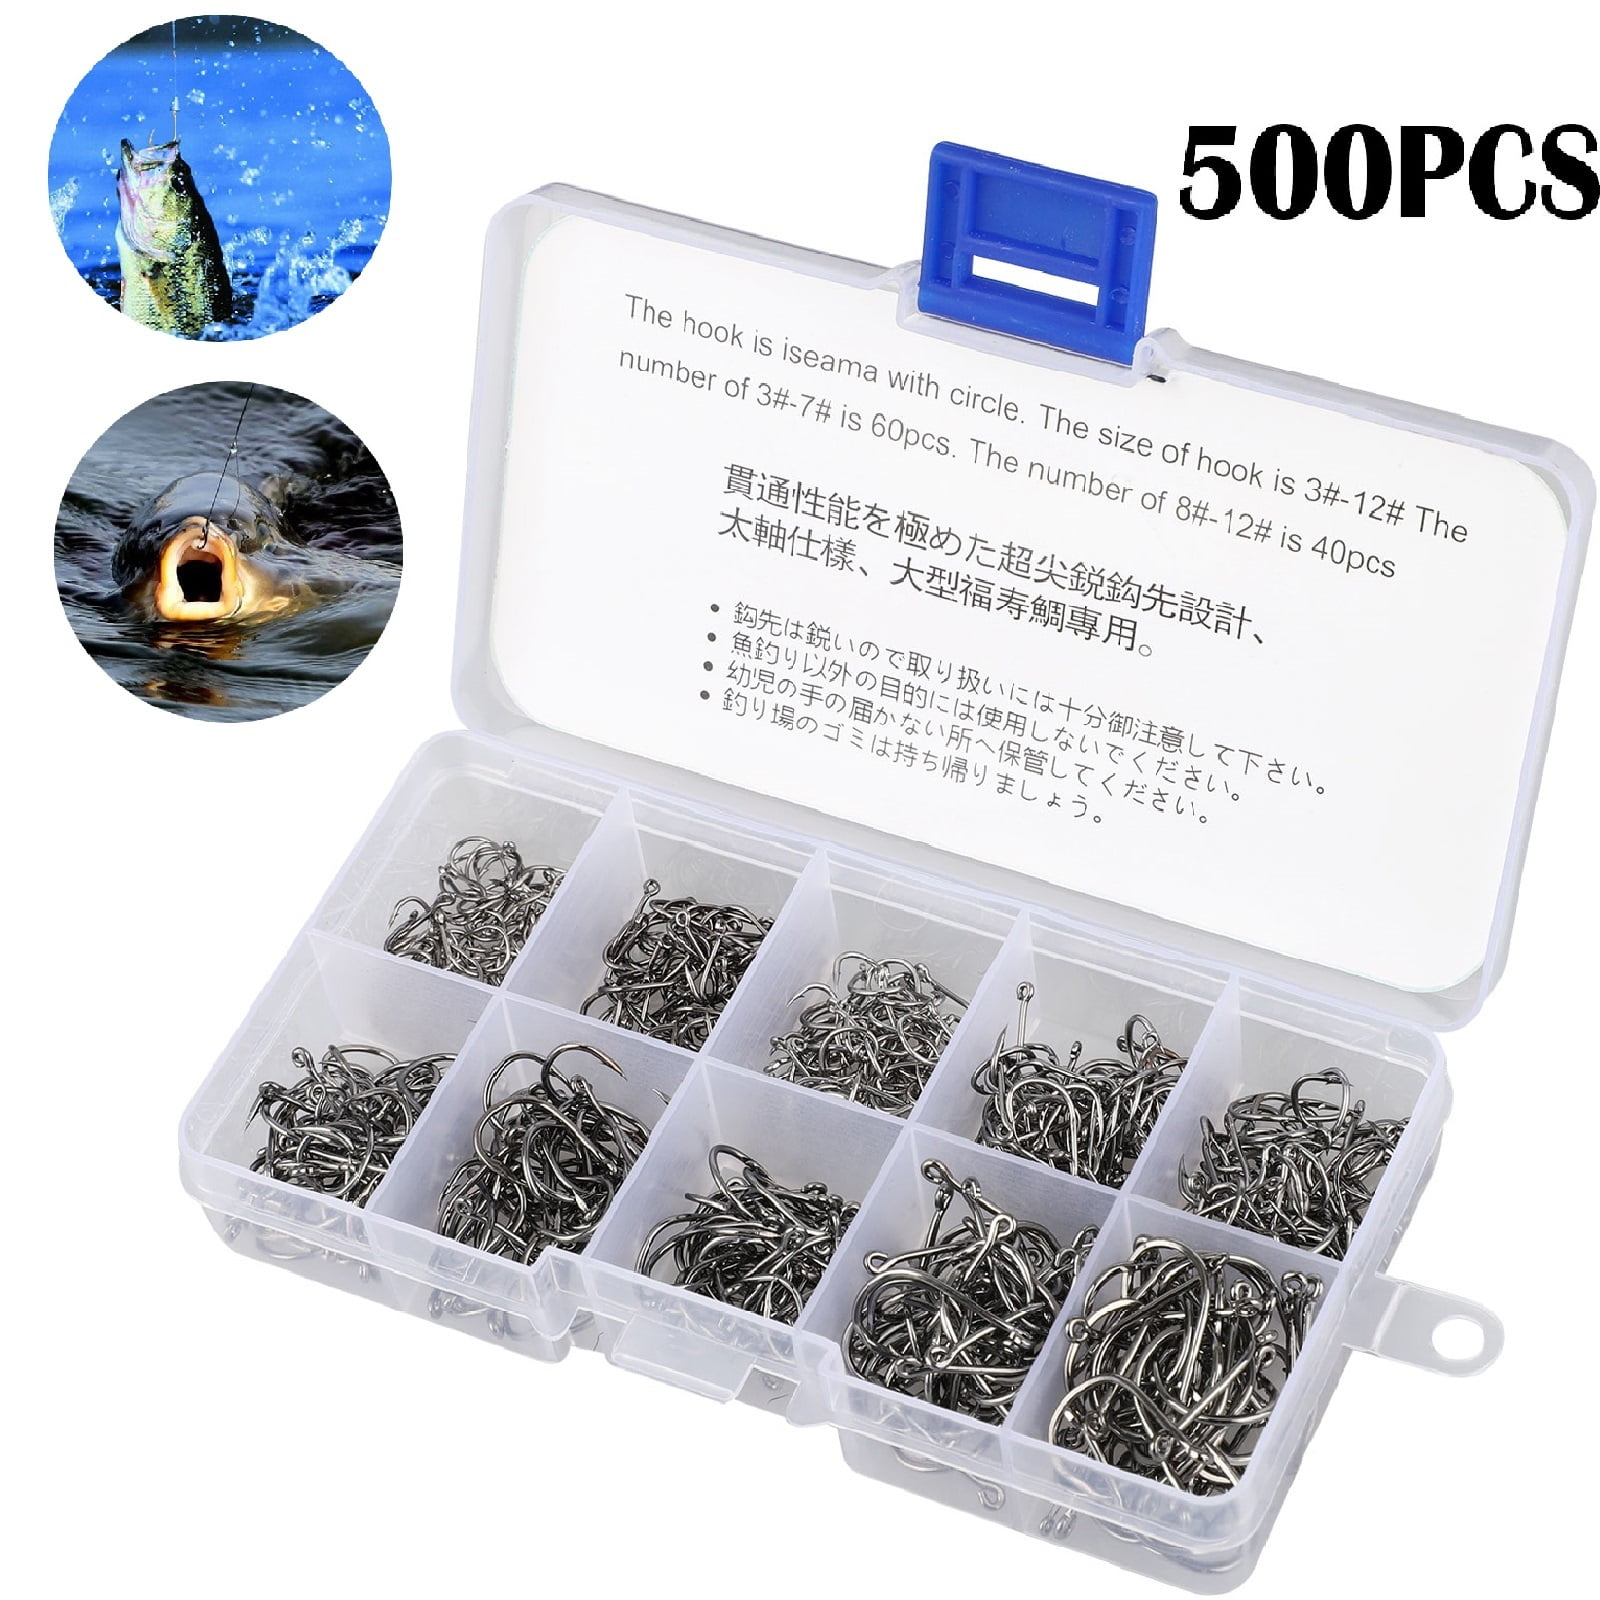 100Pc Chic Perforated Hooks Box Assorted Fishing Sharpened Hook Lure Tackle Bait 